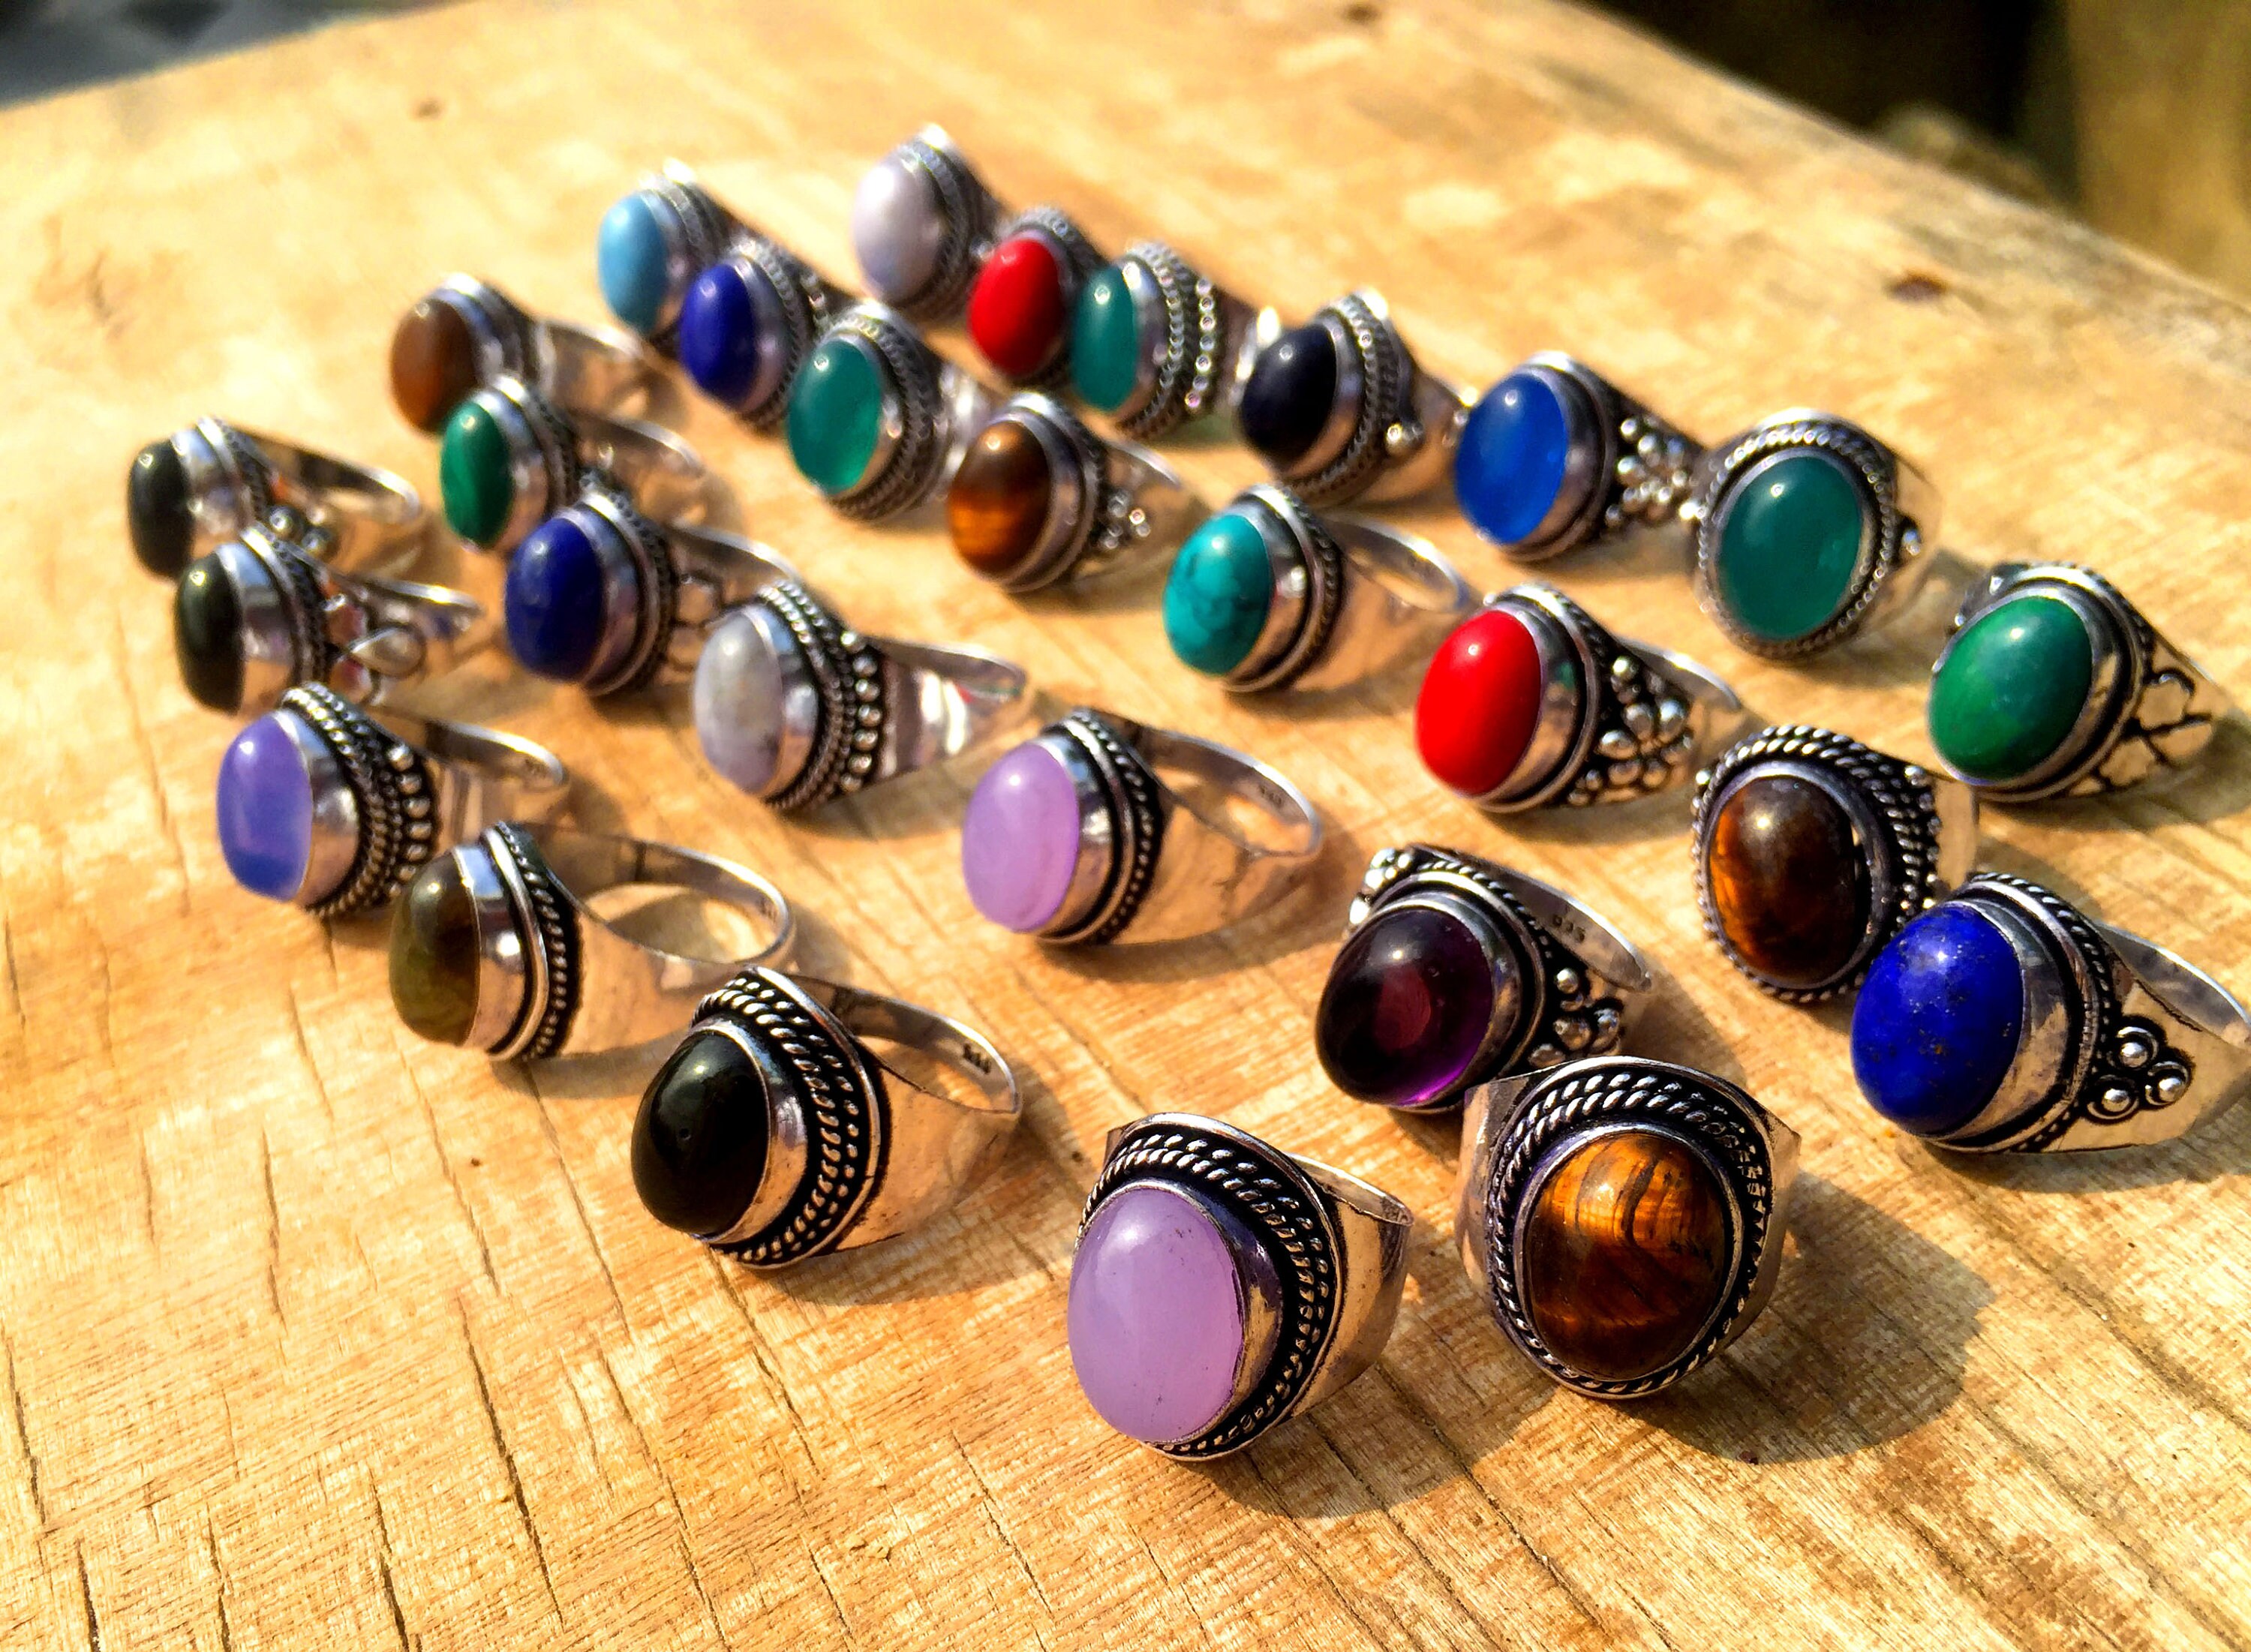 Handmade Macrame Rings, Customizable With 100 Different Crystals Rings,  Macrame Boho Style Healing Crystal Rings, Rings for Women Jewelry 